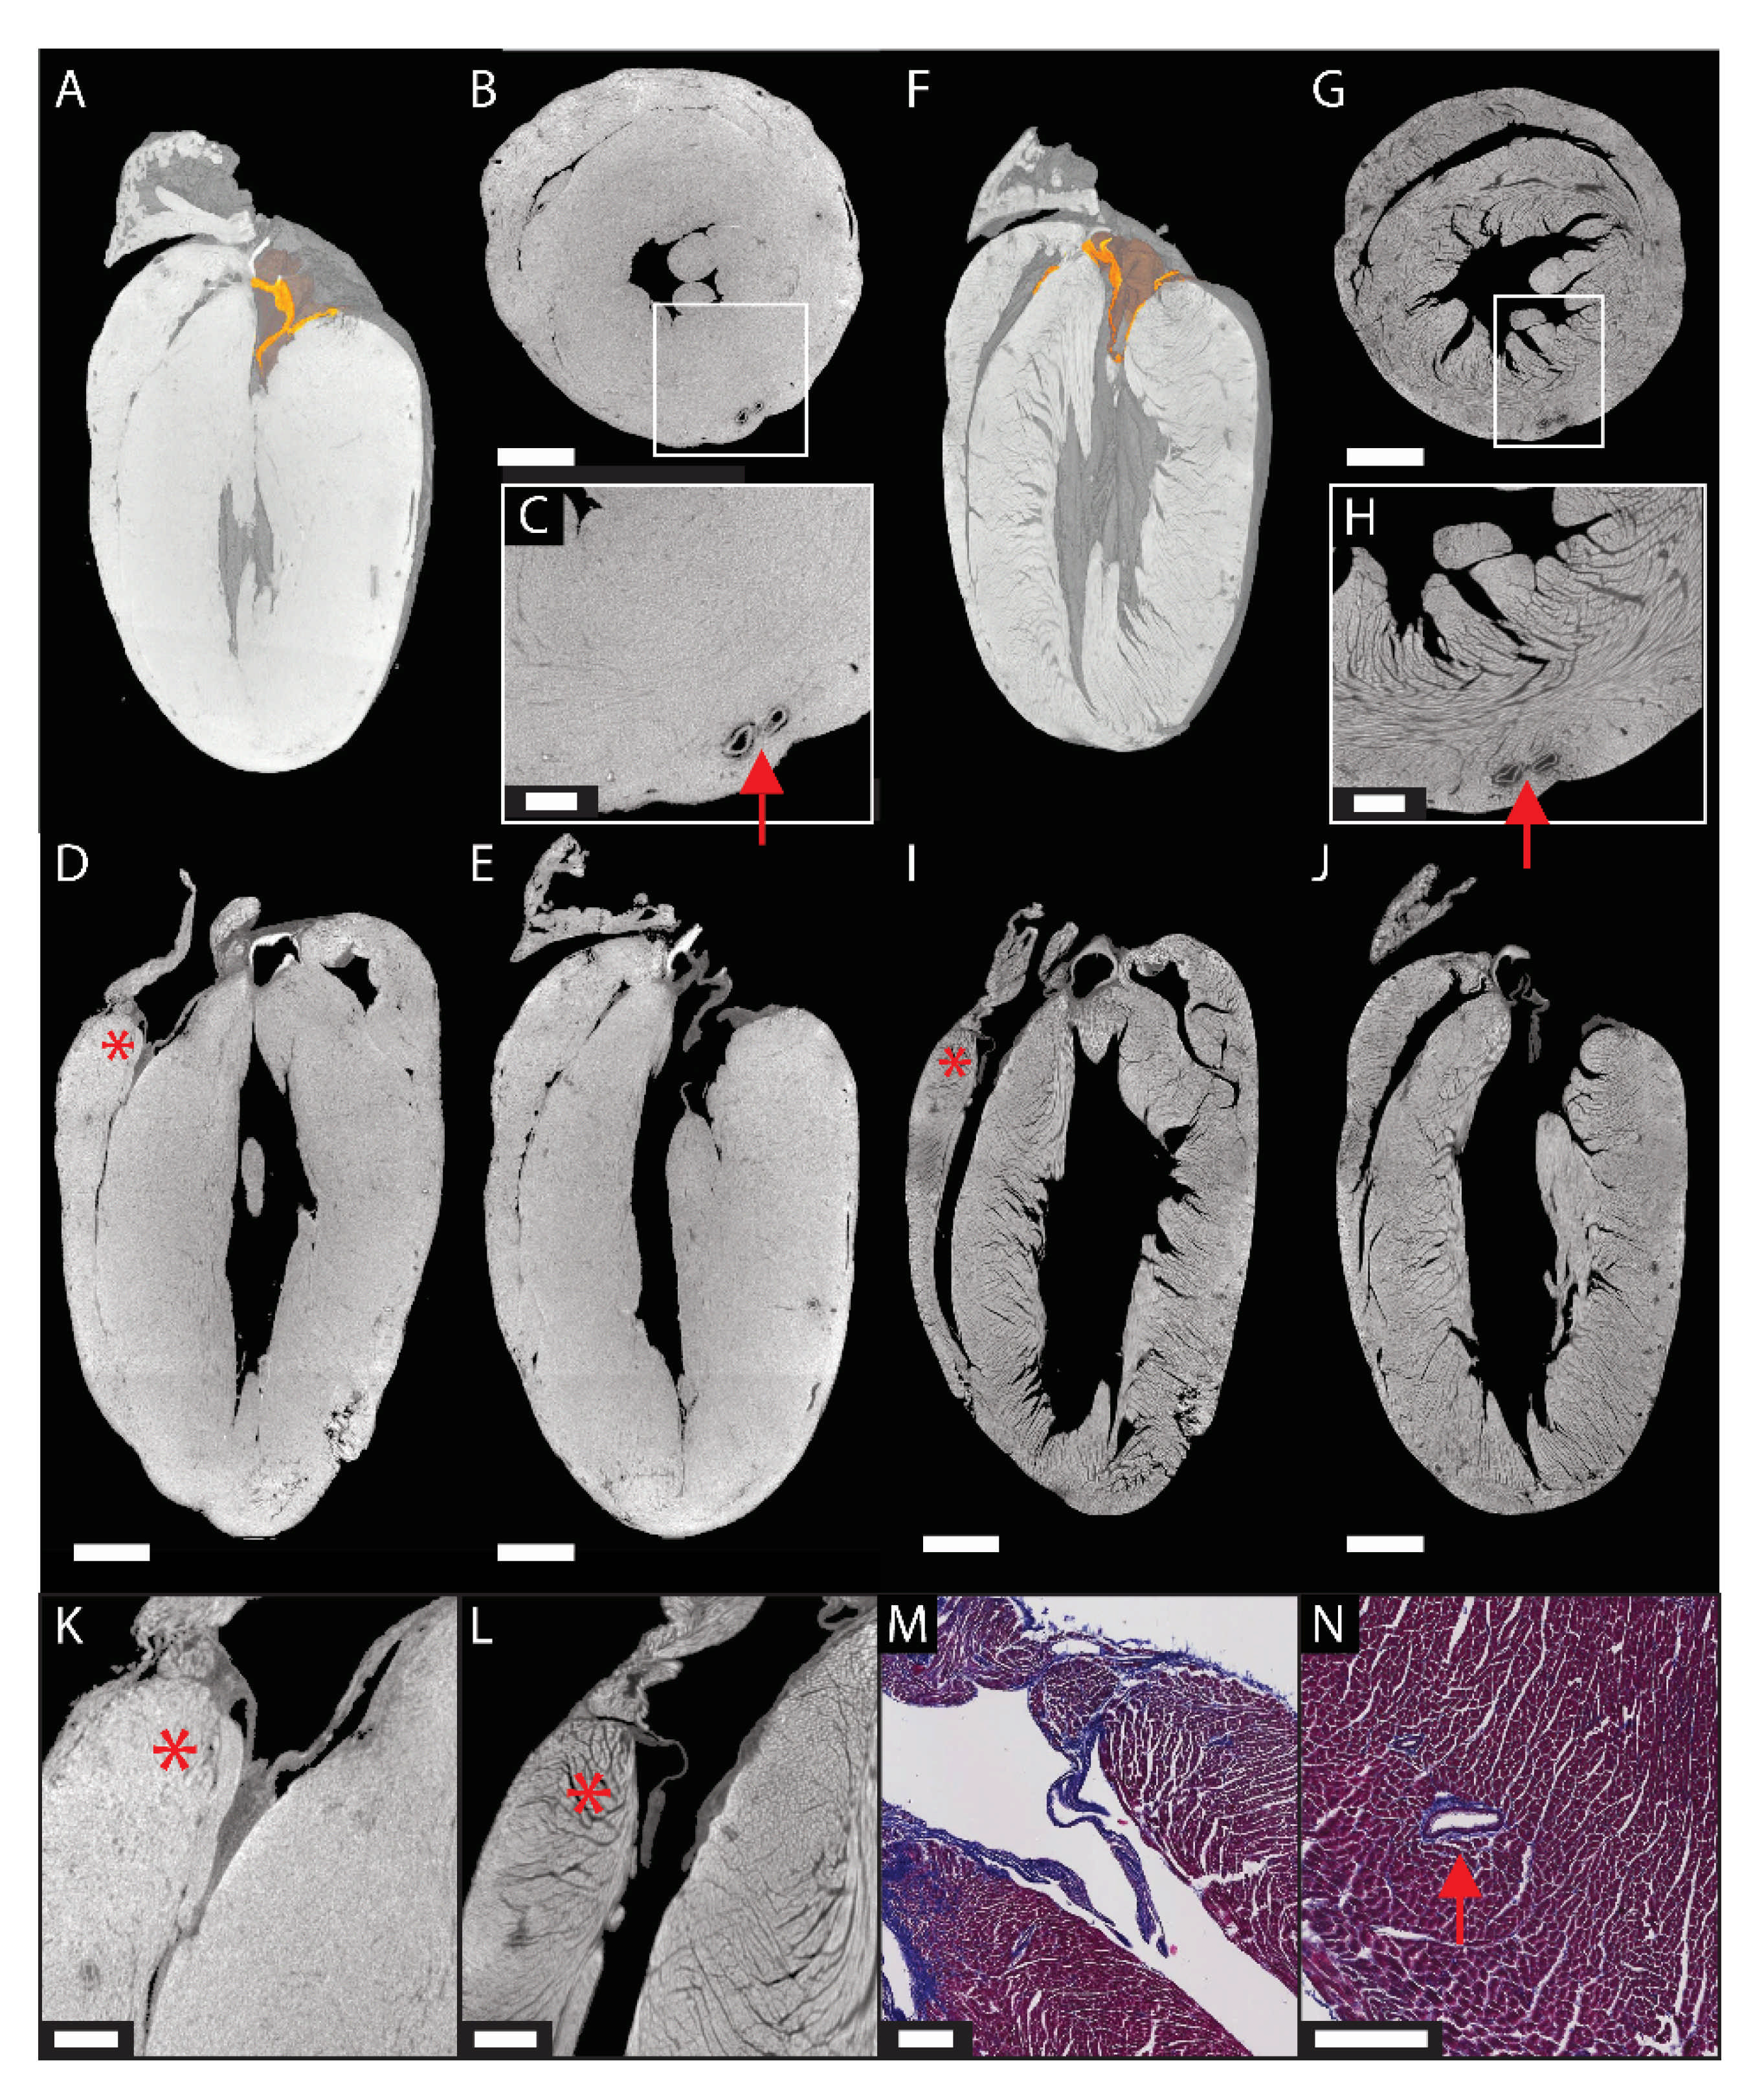 Ijms Free Full Text A Review Of Ex Vivo X Ray Microfocus Computed Tomography Based Characterization Of The Cardiovascular System Html